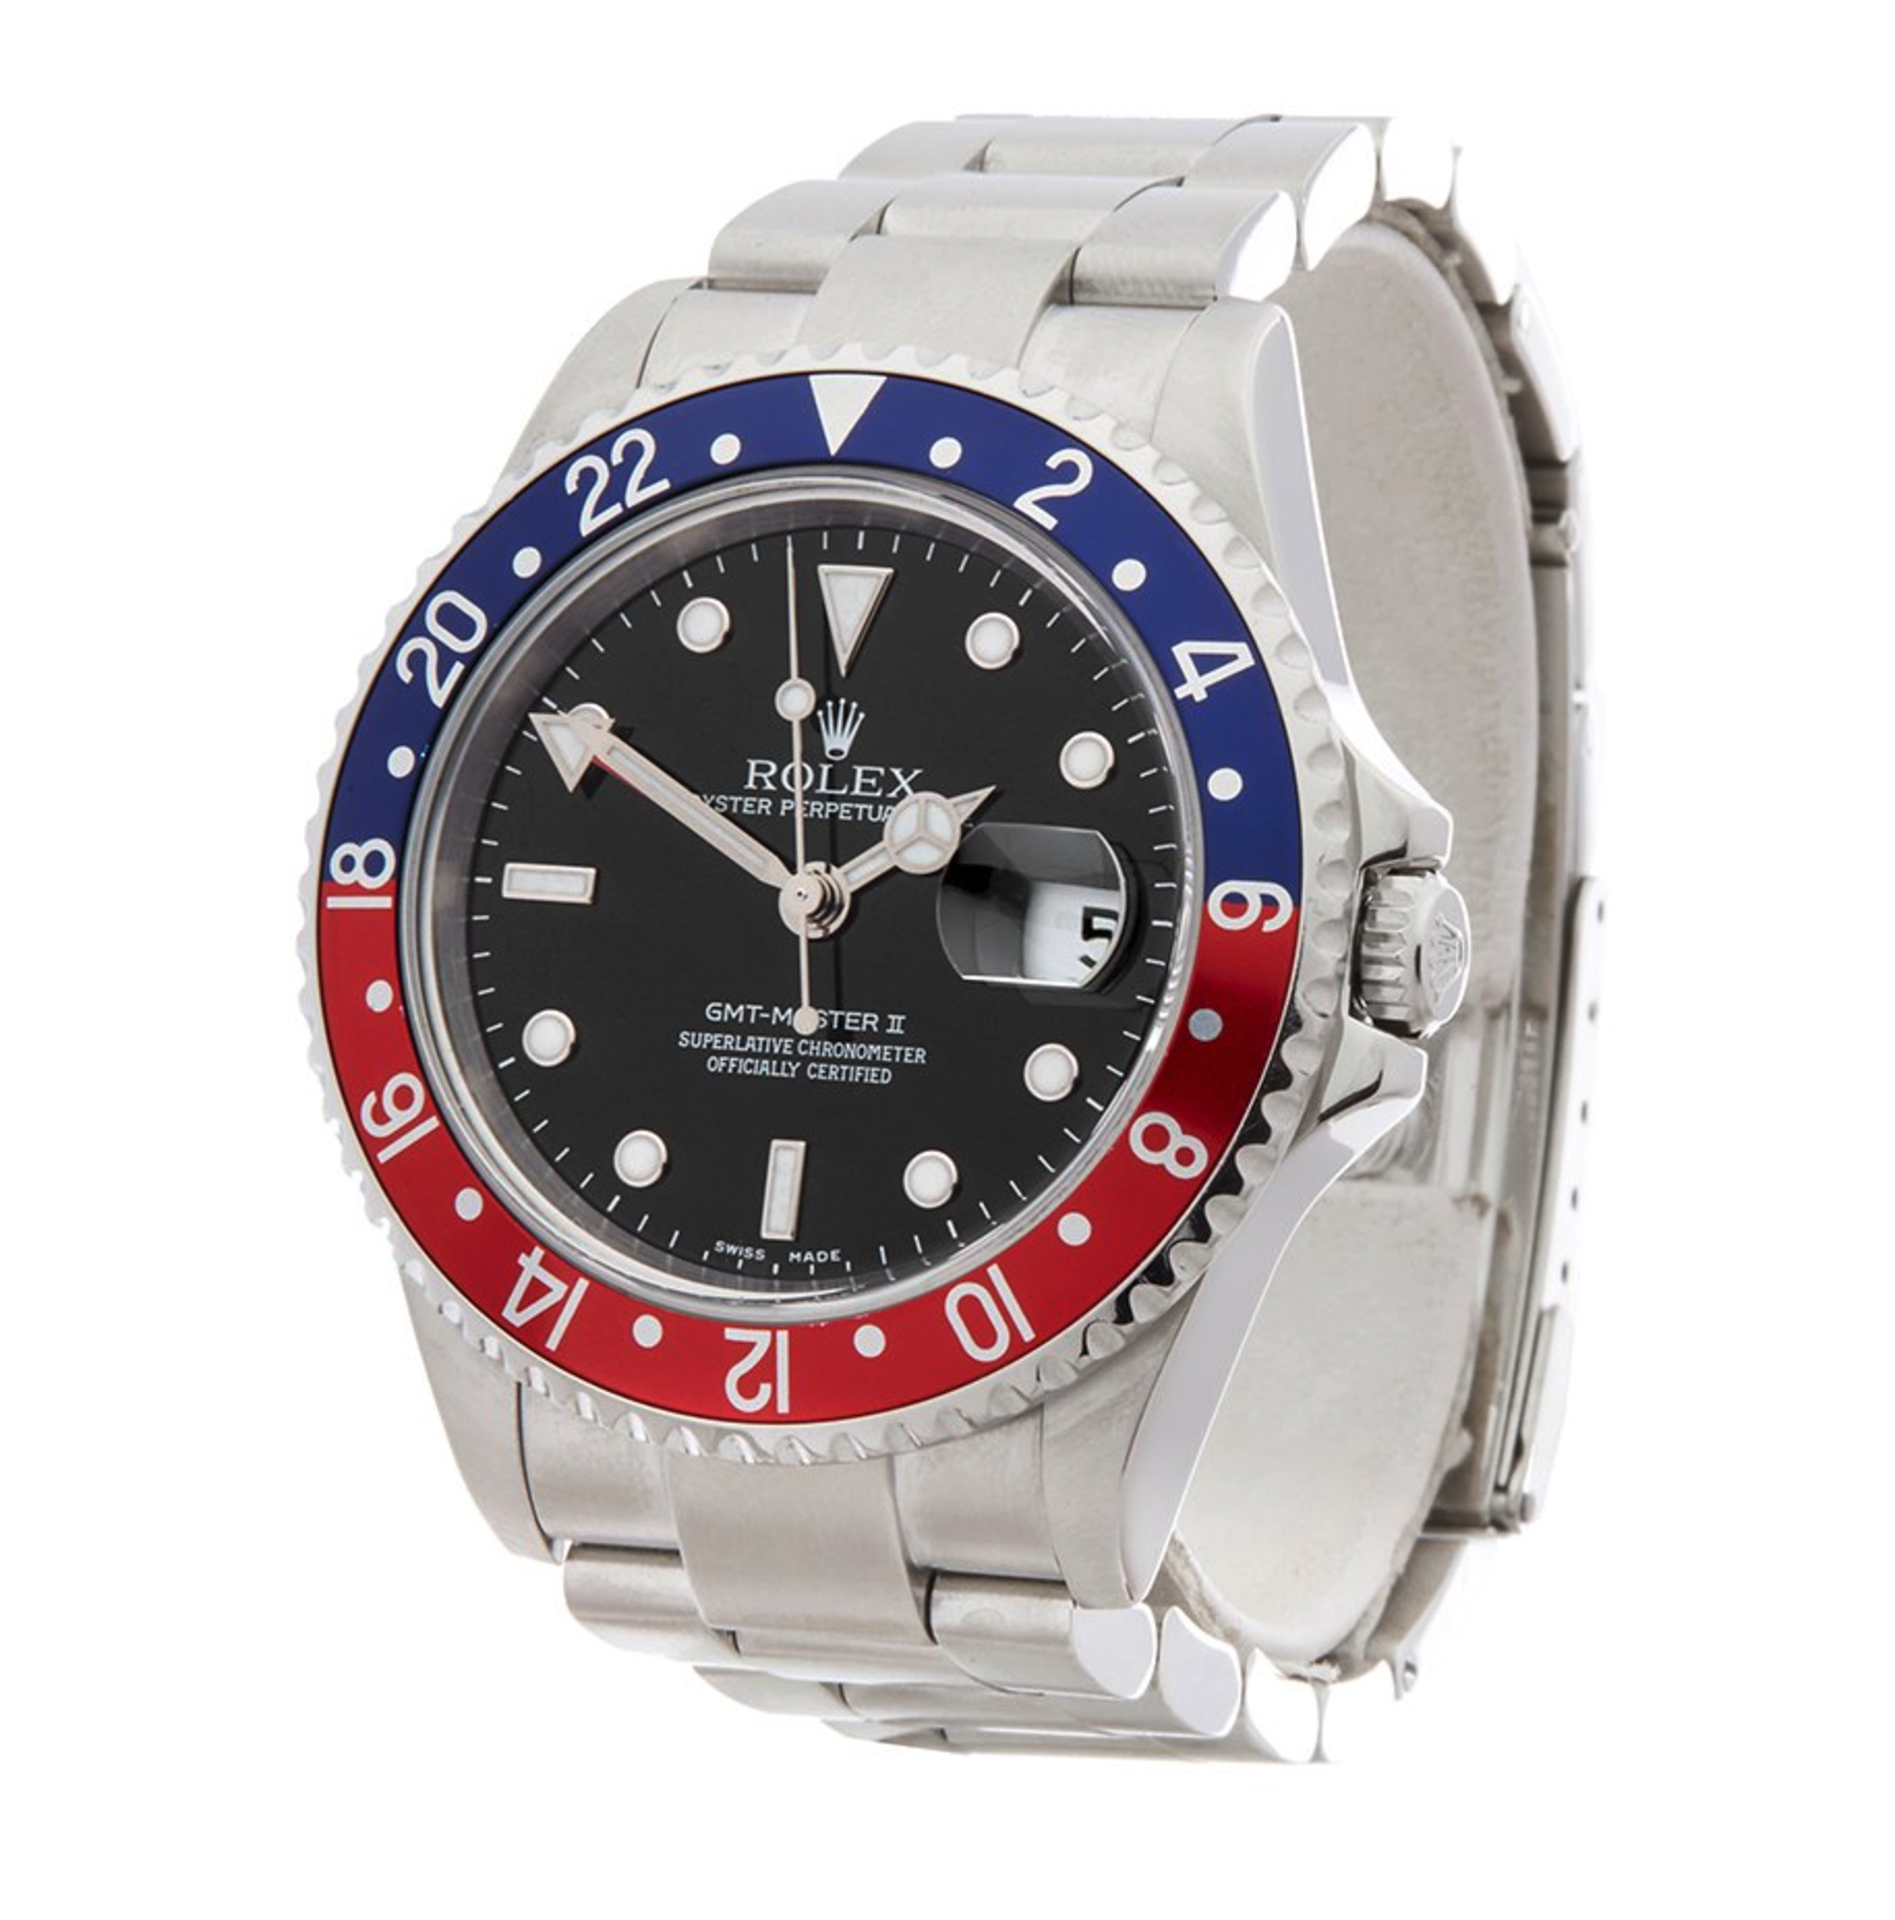 Rolex GMT-Master II Pepsi Stainless Steel - 16710 - Image 2 of 8